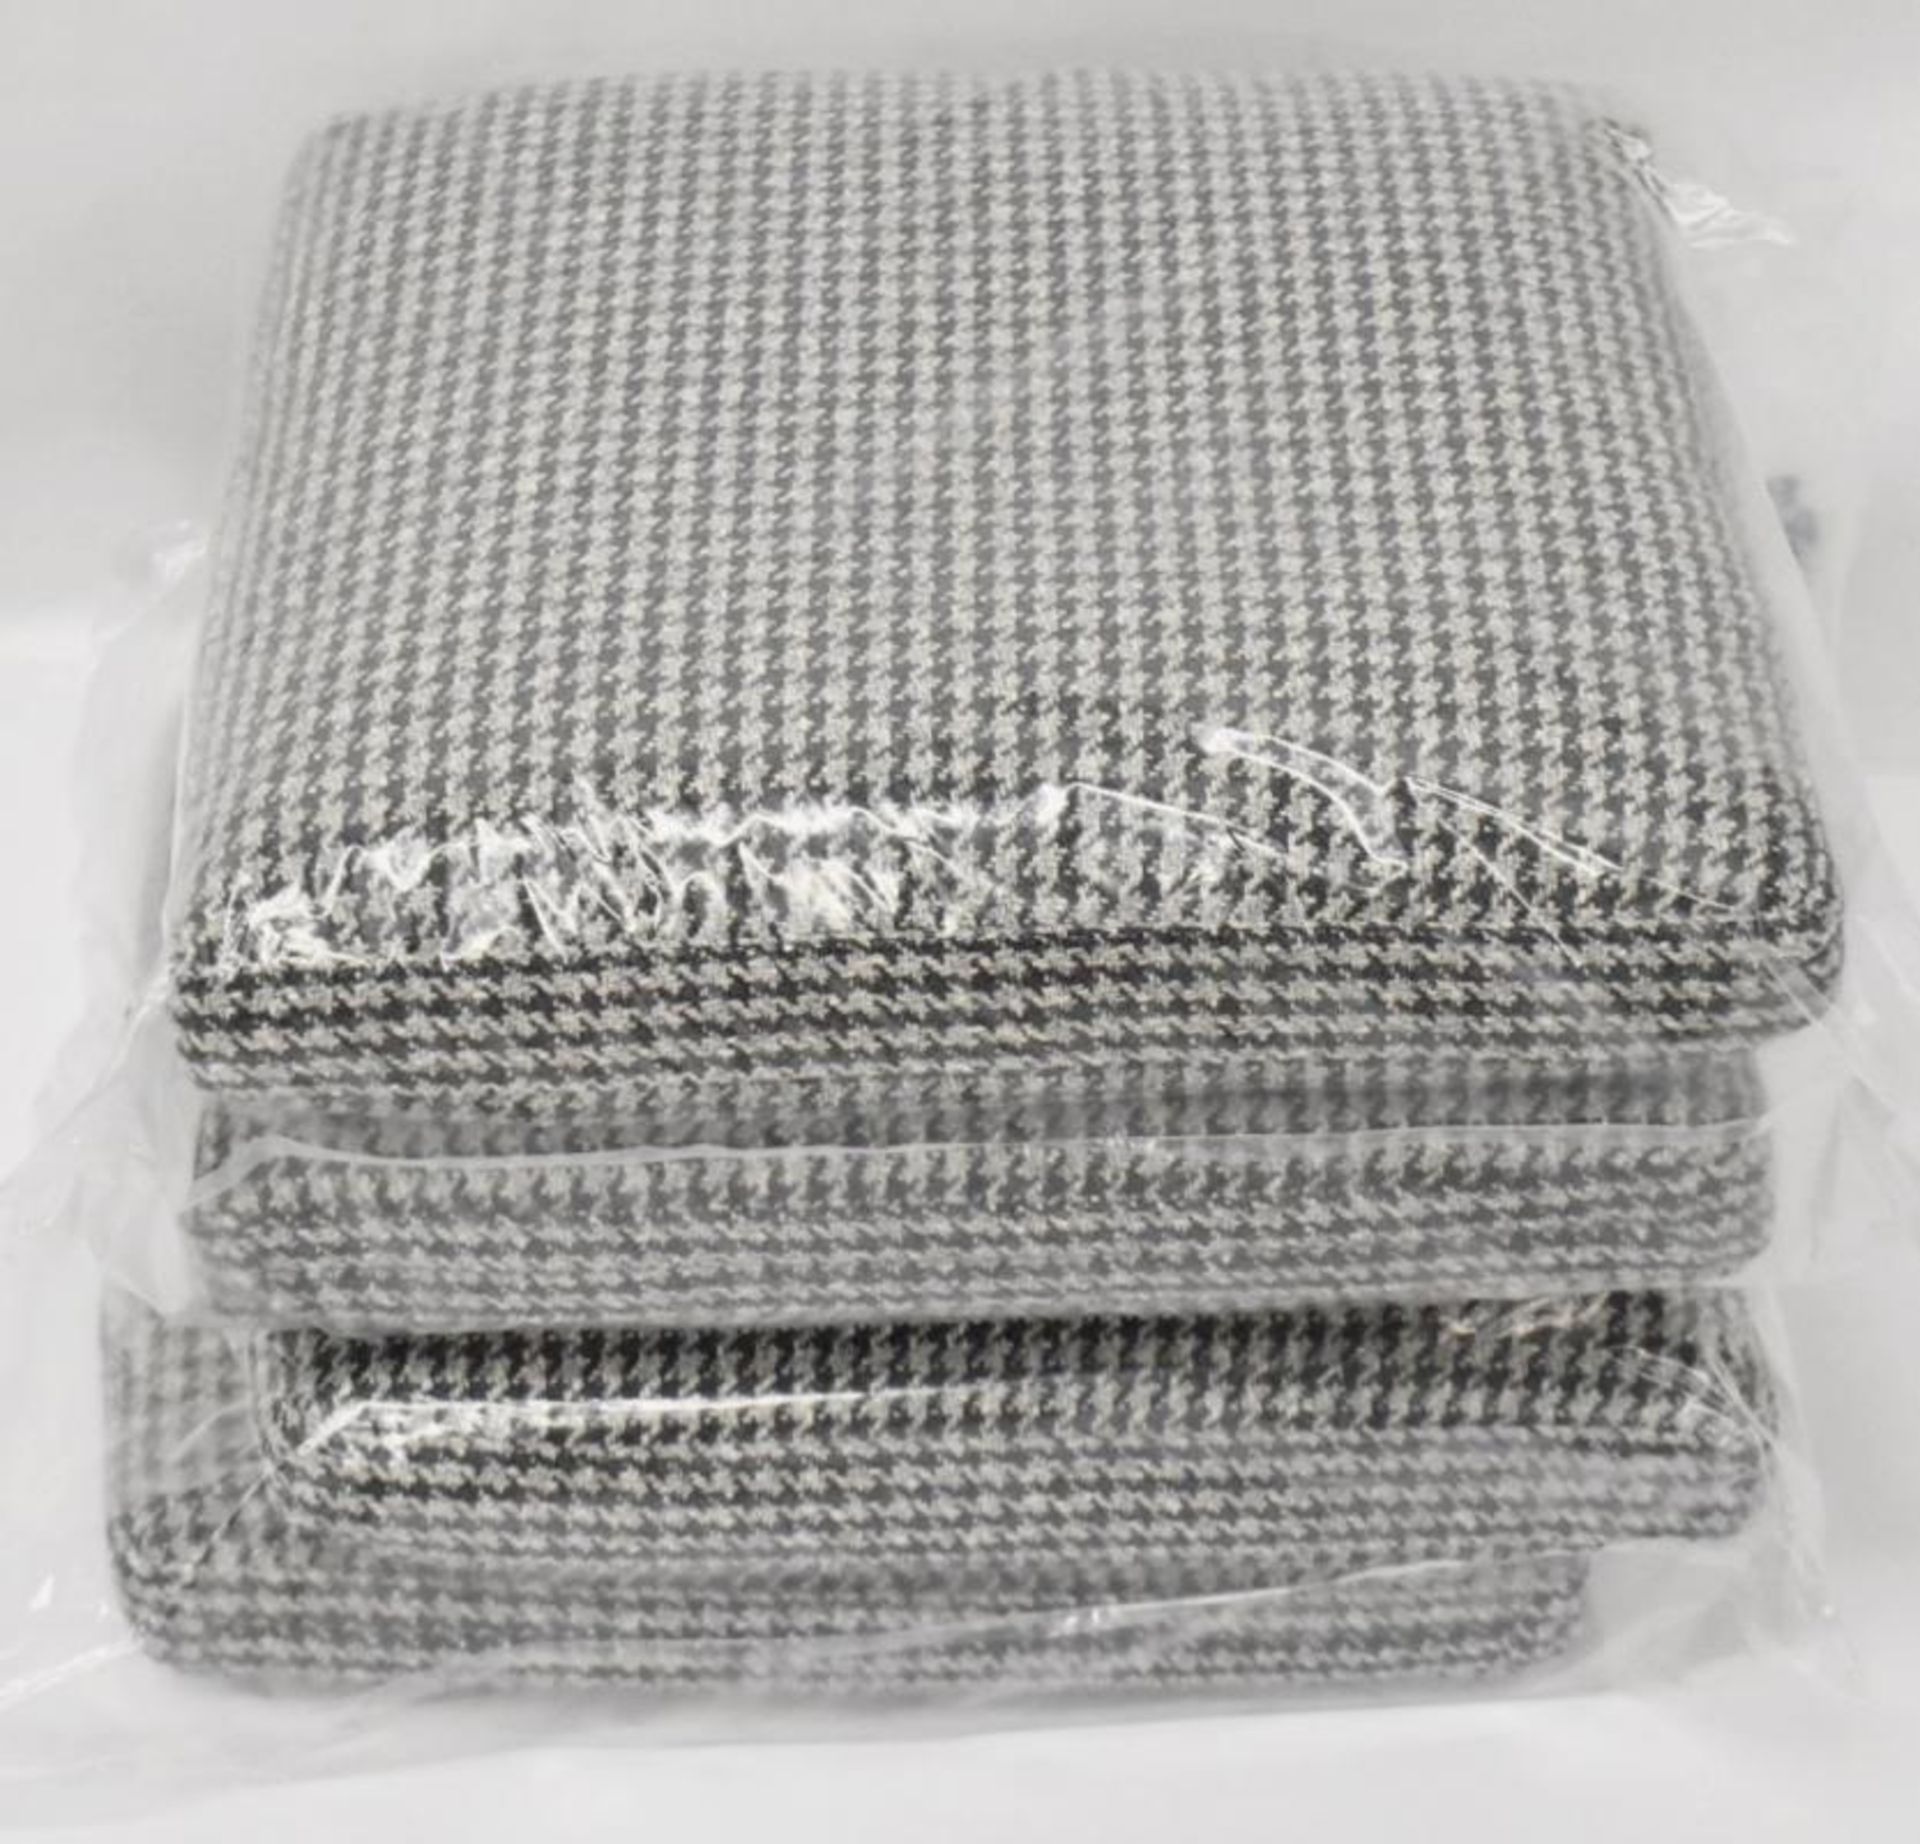 4 x B&B ITALIA 'Andy 13' Sofa Back Cushions In A Premium Woven Houndstooth Fabric - Ref: 5089331/B/P - Image 4 of 4